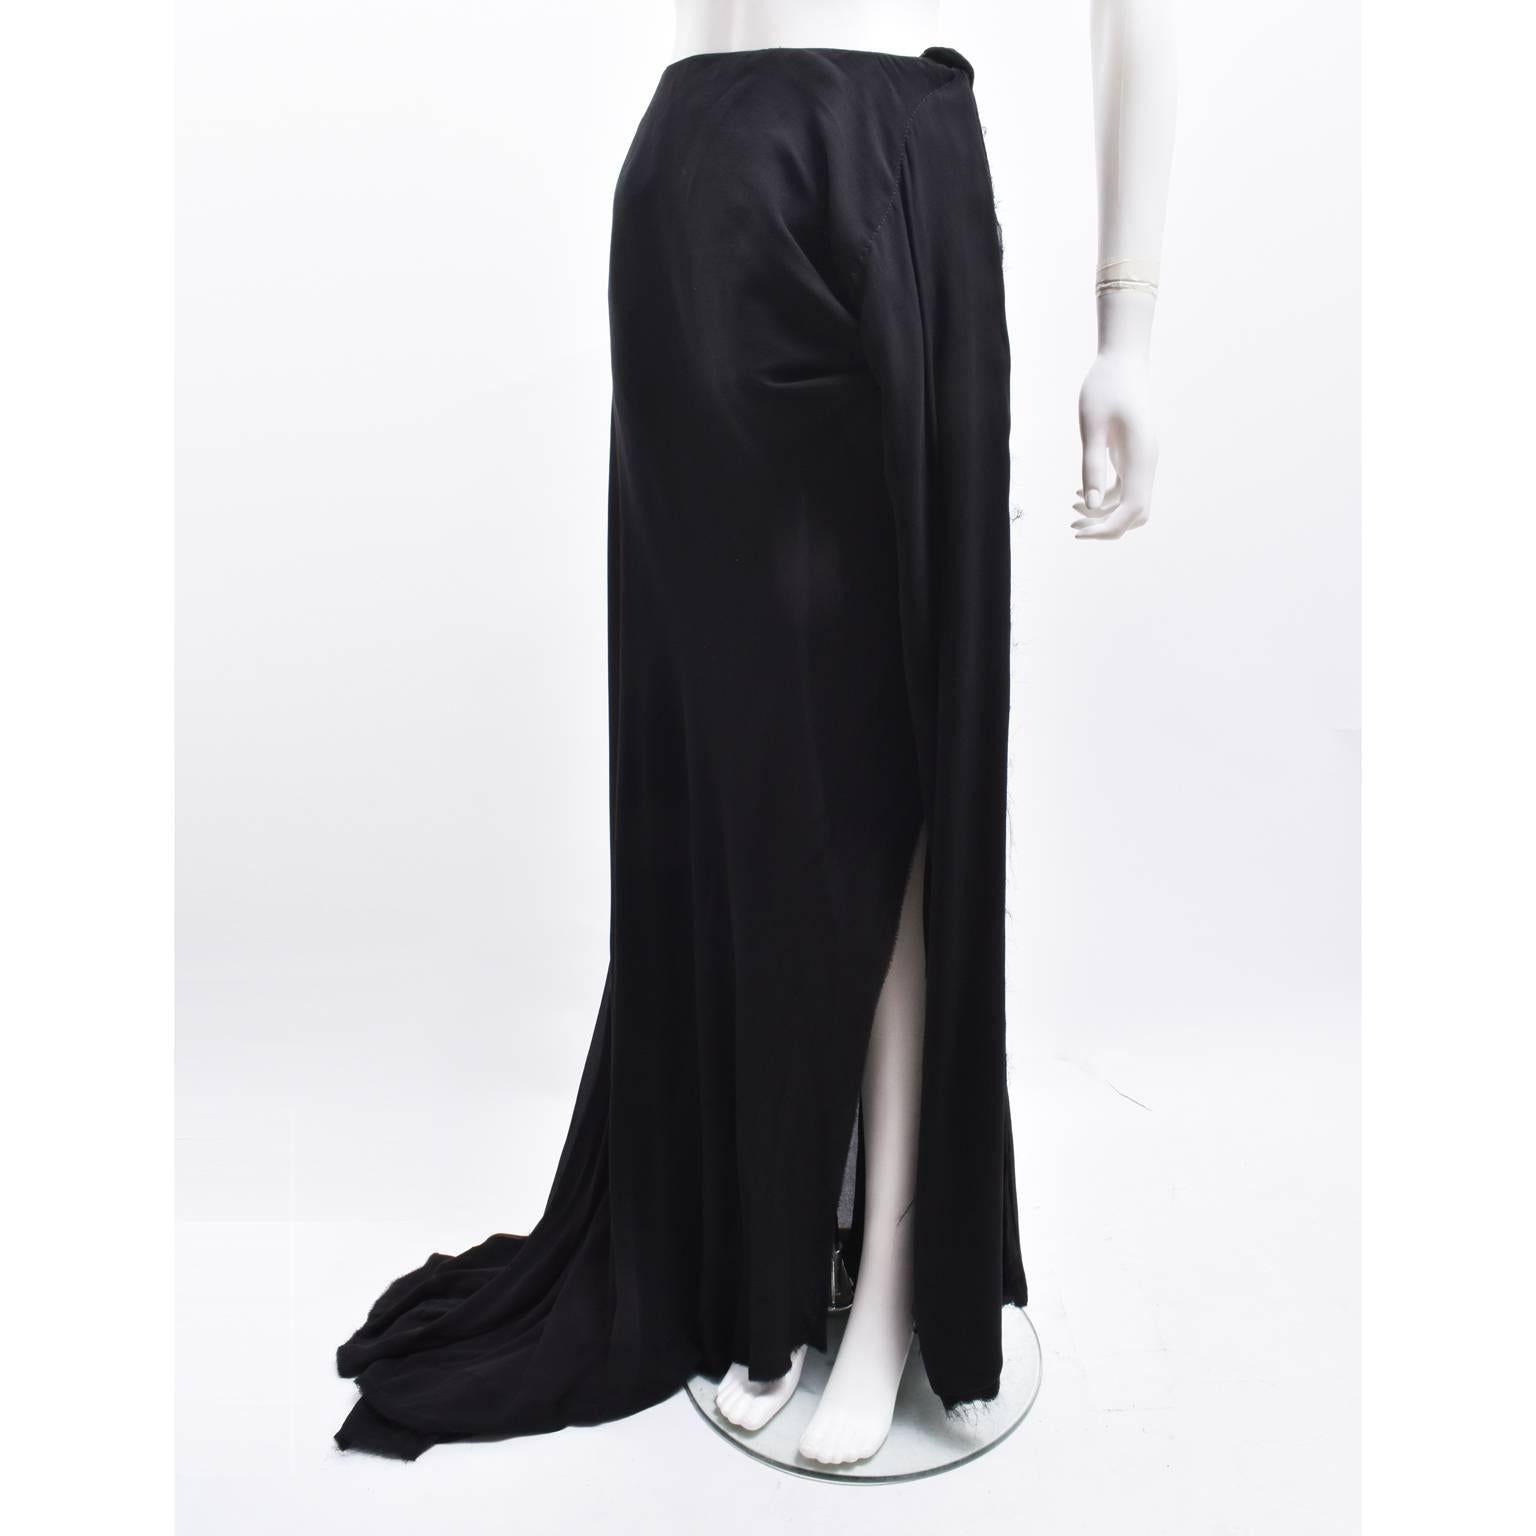 A beautiful long draped skirt by Vivienne Westwood. The ‘Acorn’ skirt sits on the waist and flows down to floor length with elegant draped folds. The skirt has an asymmetric shape with a side slit and a knot at the top of the slit that creates